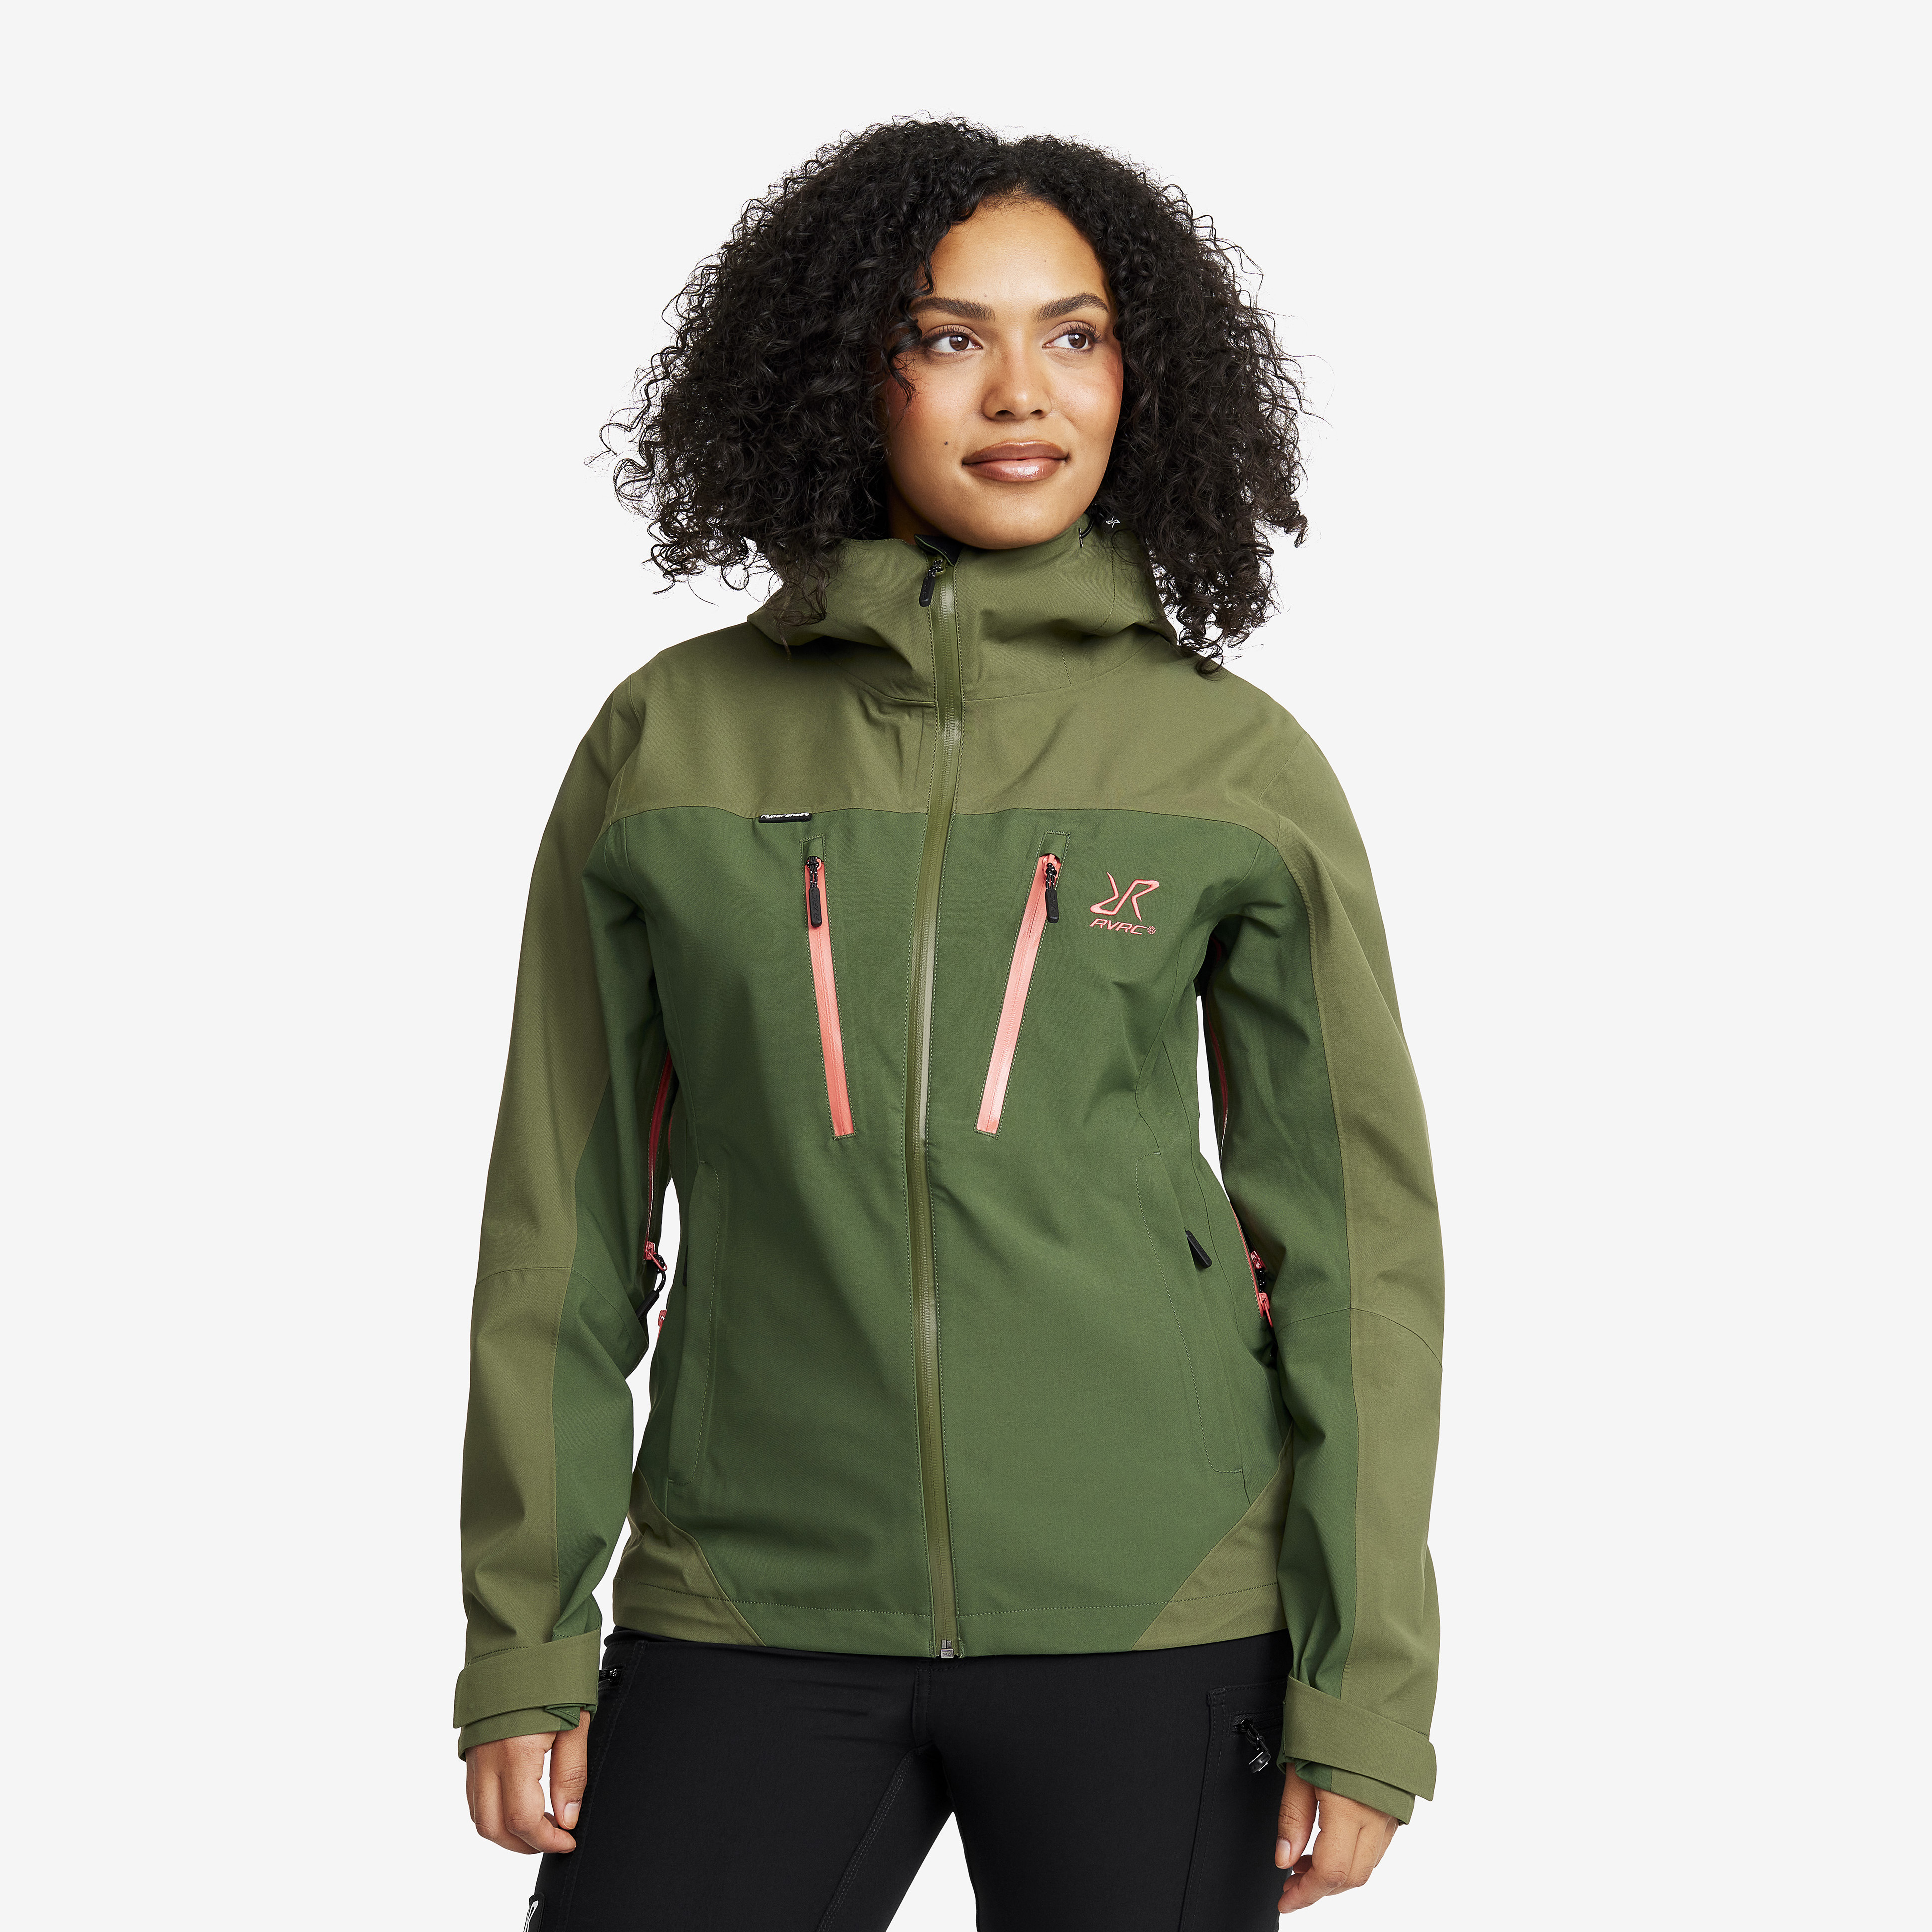 Silence Proshell 3L Jacket Cypress/Black Forest Mujeres